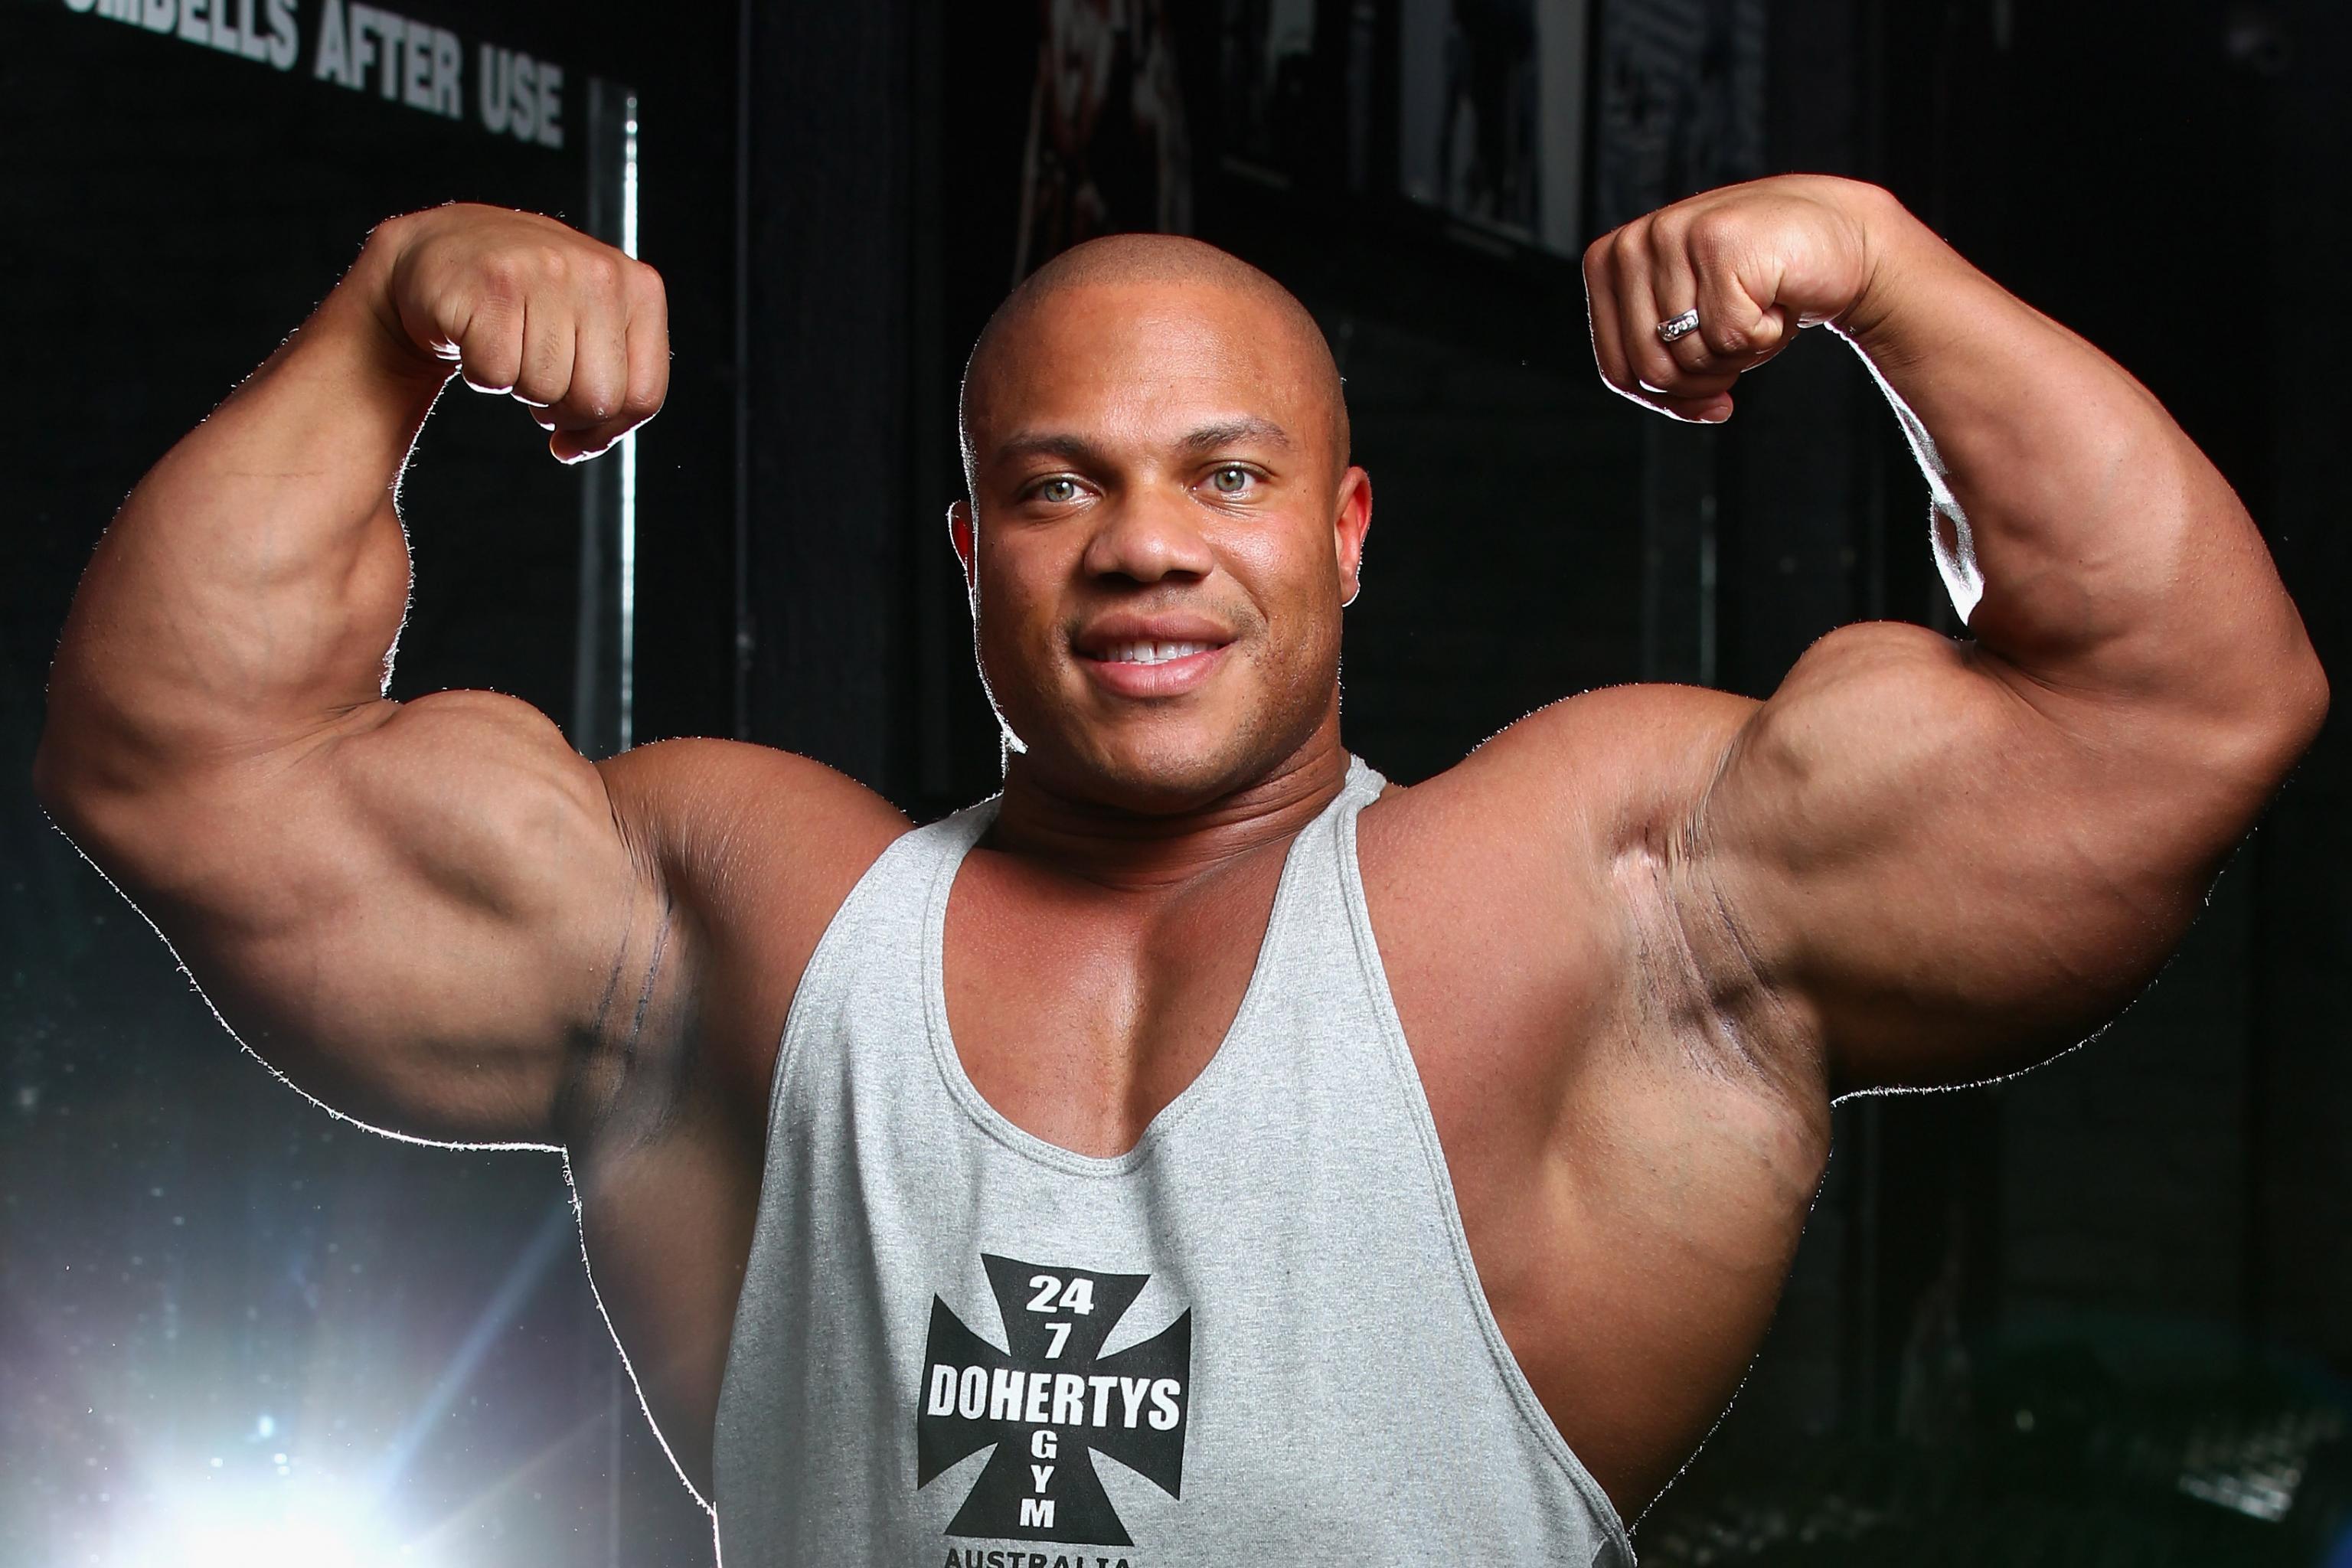 Mr Olympia 16 Winner Phil Heath S Physique Info And Top Comments Bleacher Report Latest News Videos And Highlights